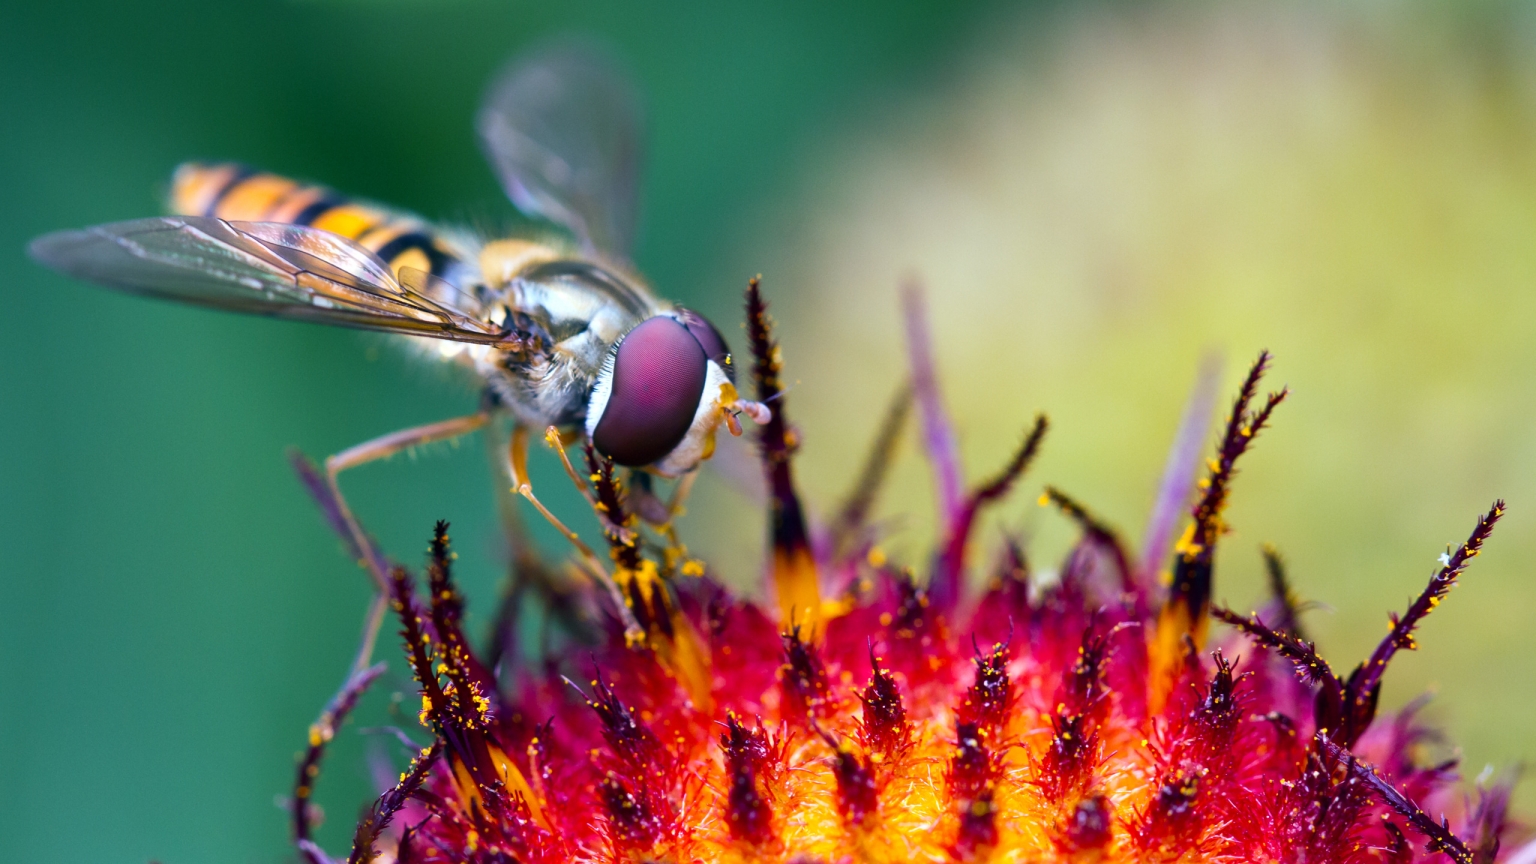 Hover Fly at Work for 1536 x 864 HDTV resolution